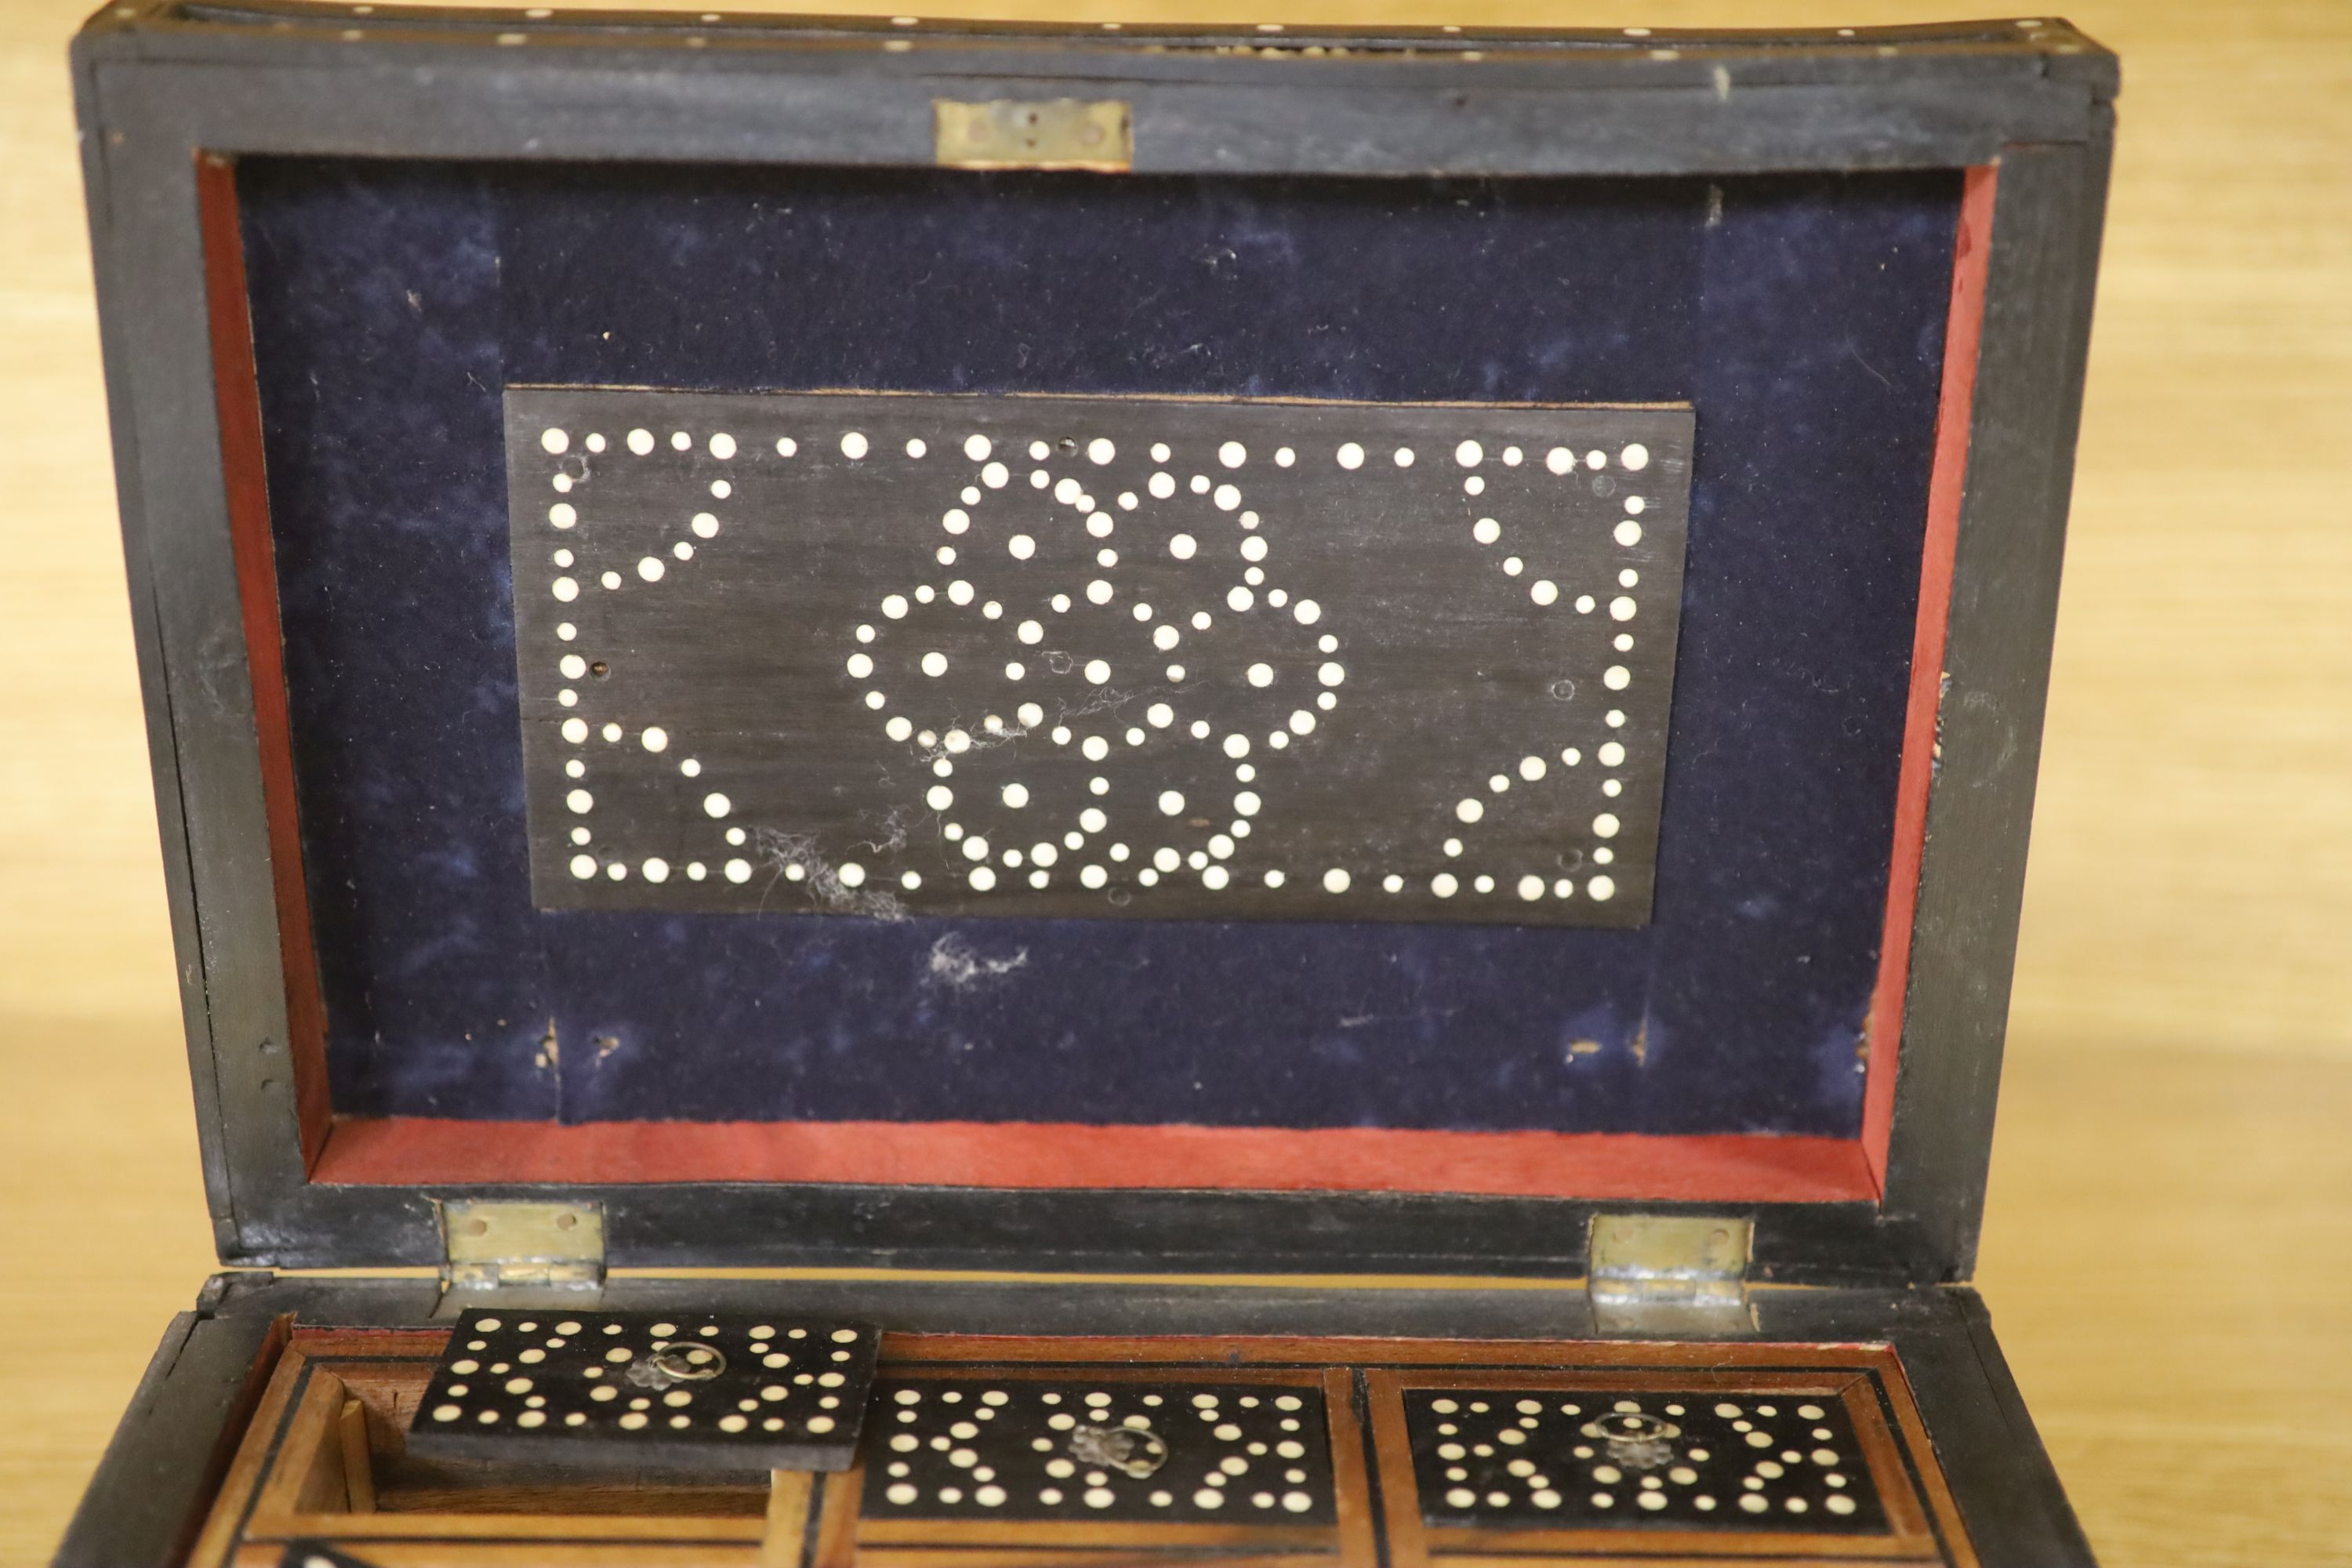 Four Ceylonese quillwork boxes, early 20th century, largest 28 x 19 x 10cm, an Indian inlaid box a - Image 10 of 10